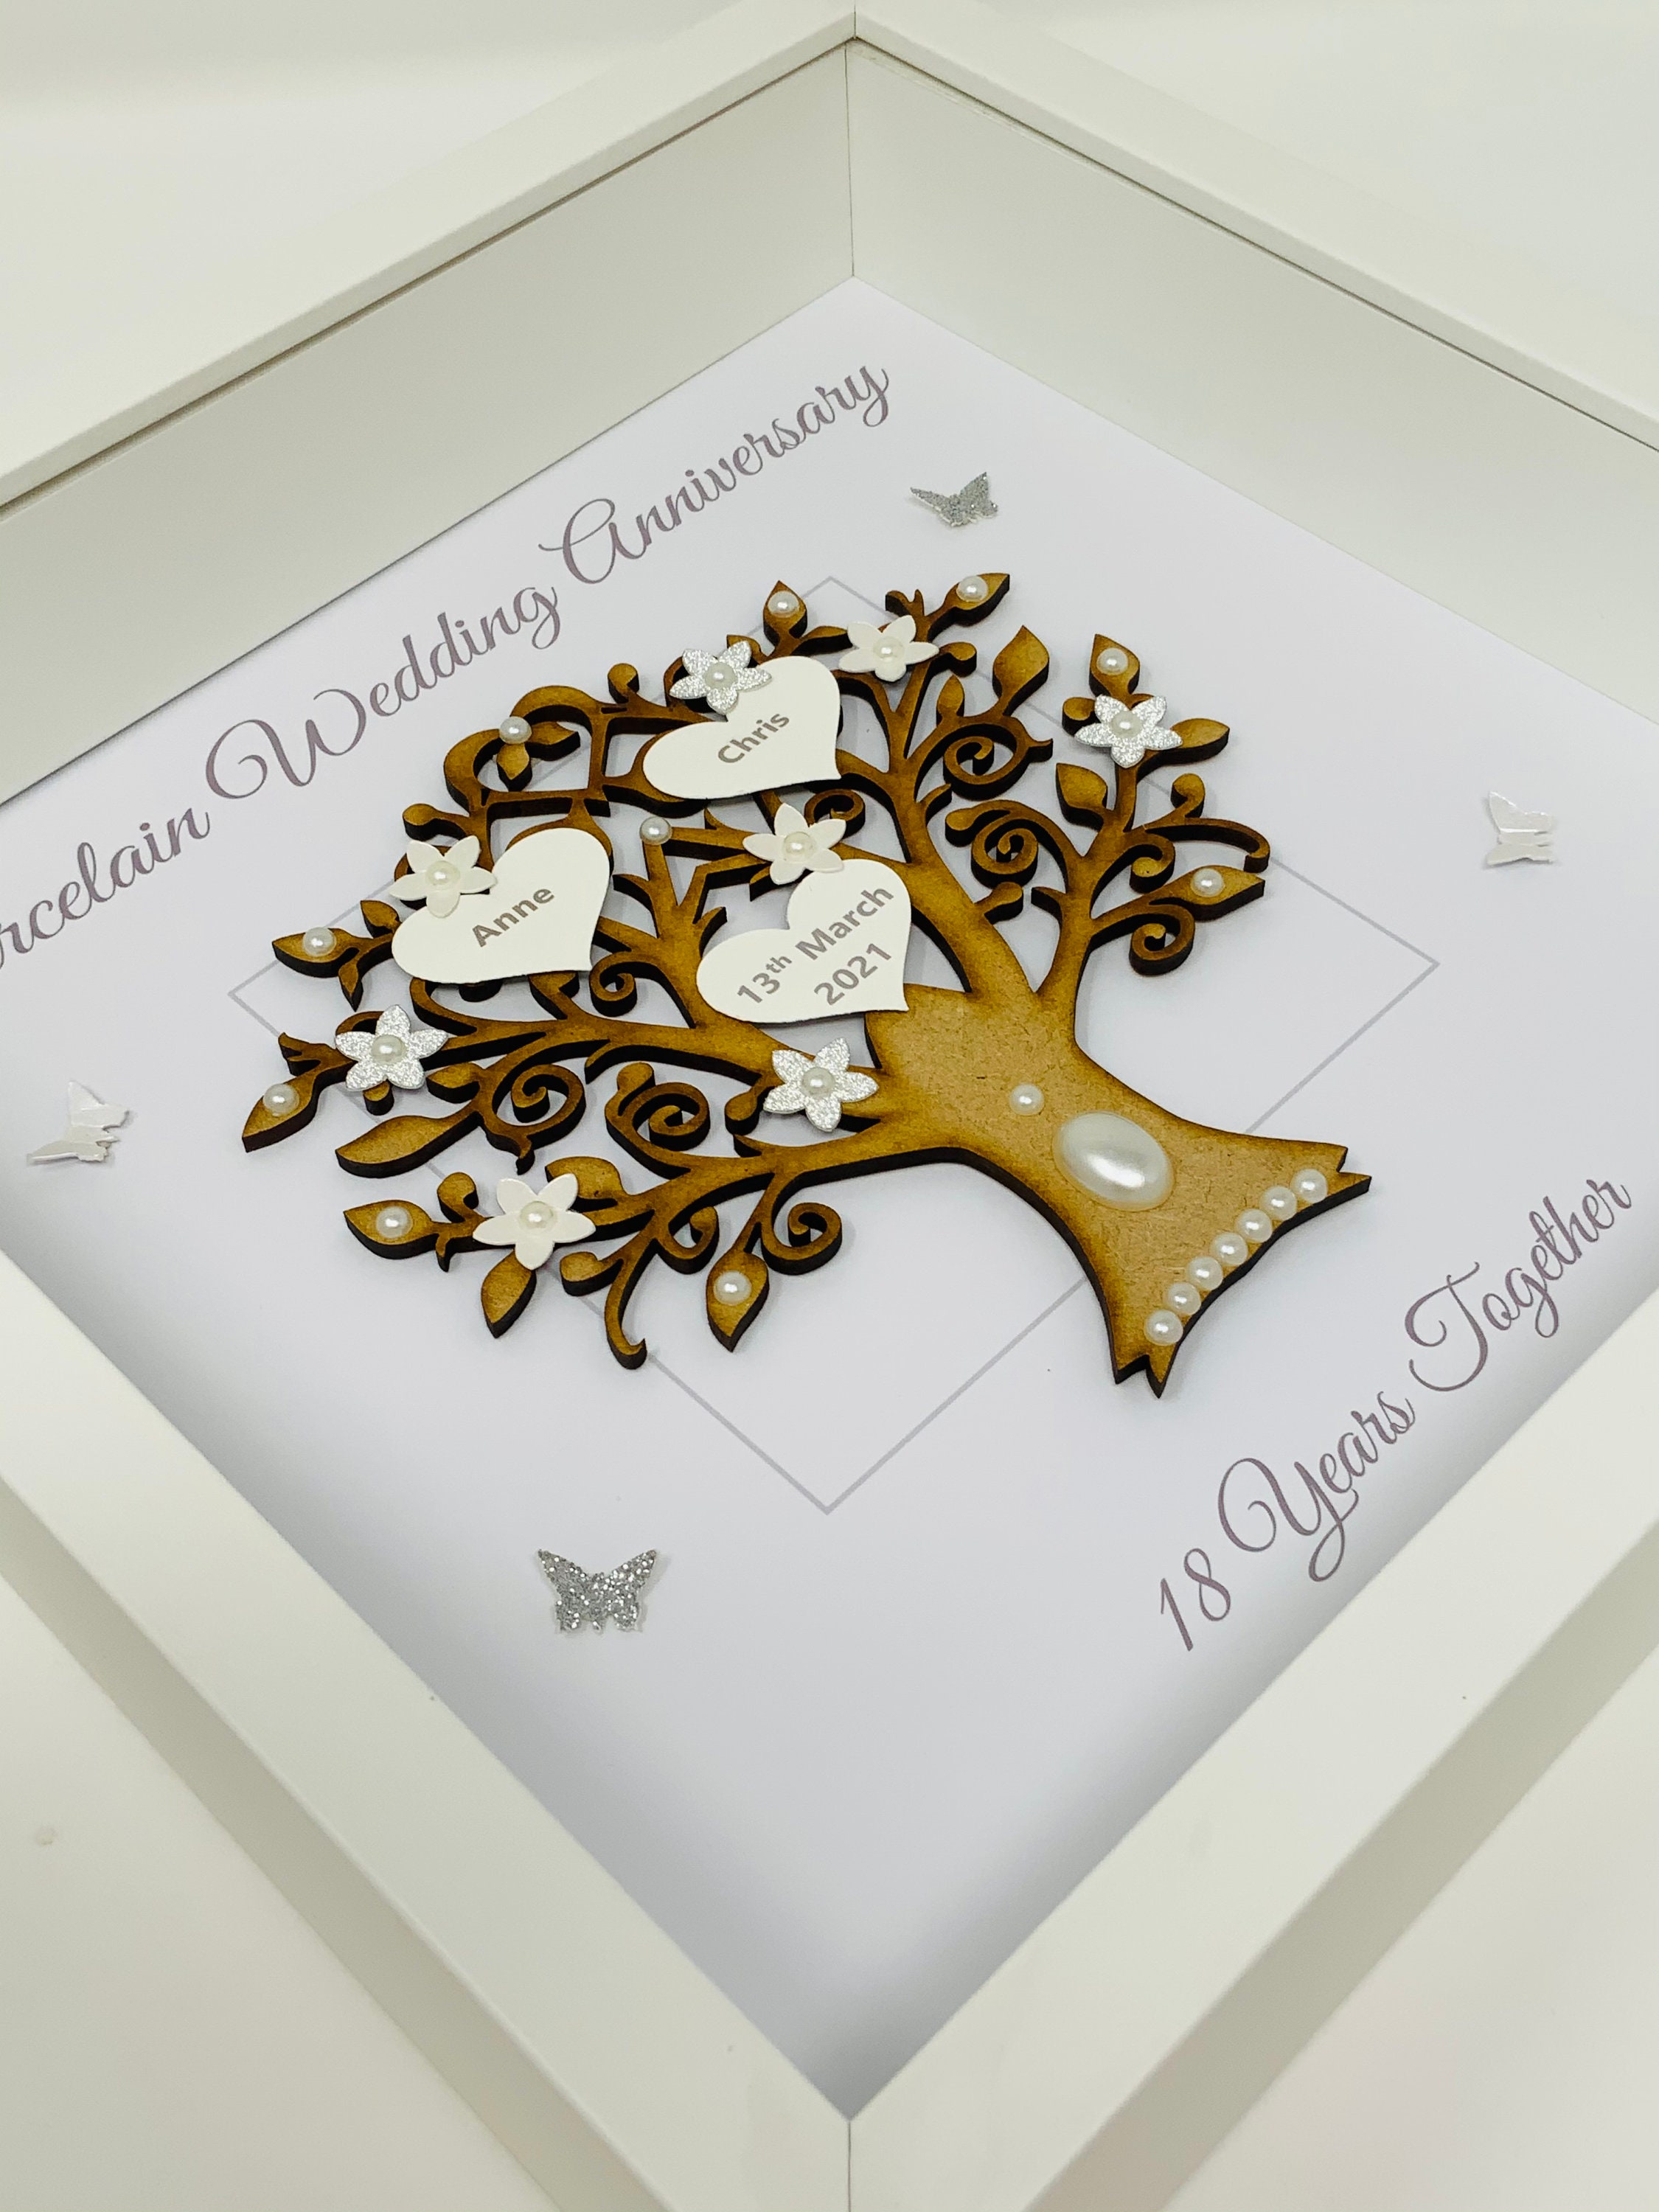 Personalized Cute Porcelain Anniversary Gifts for Him 18th